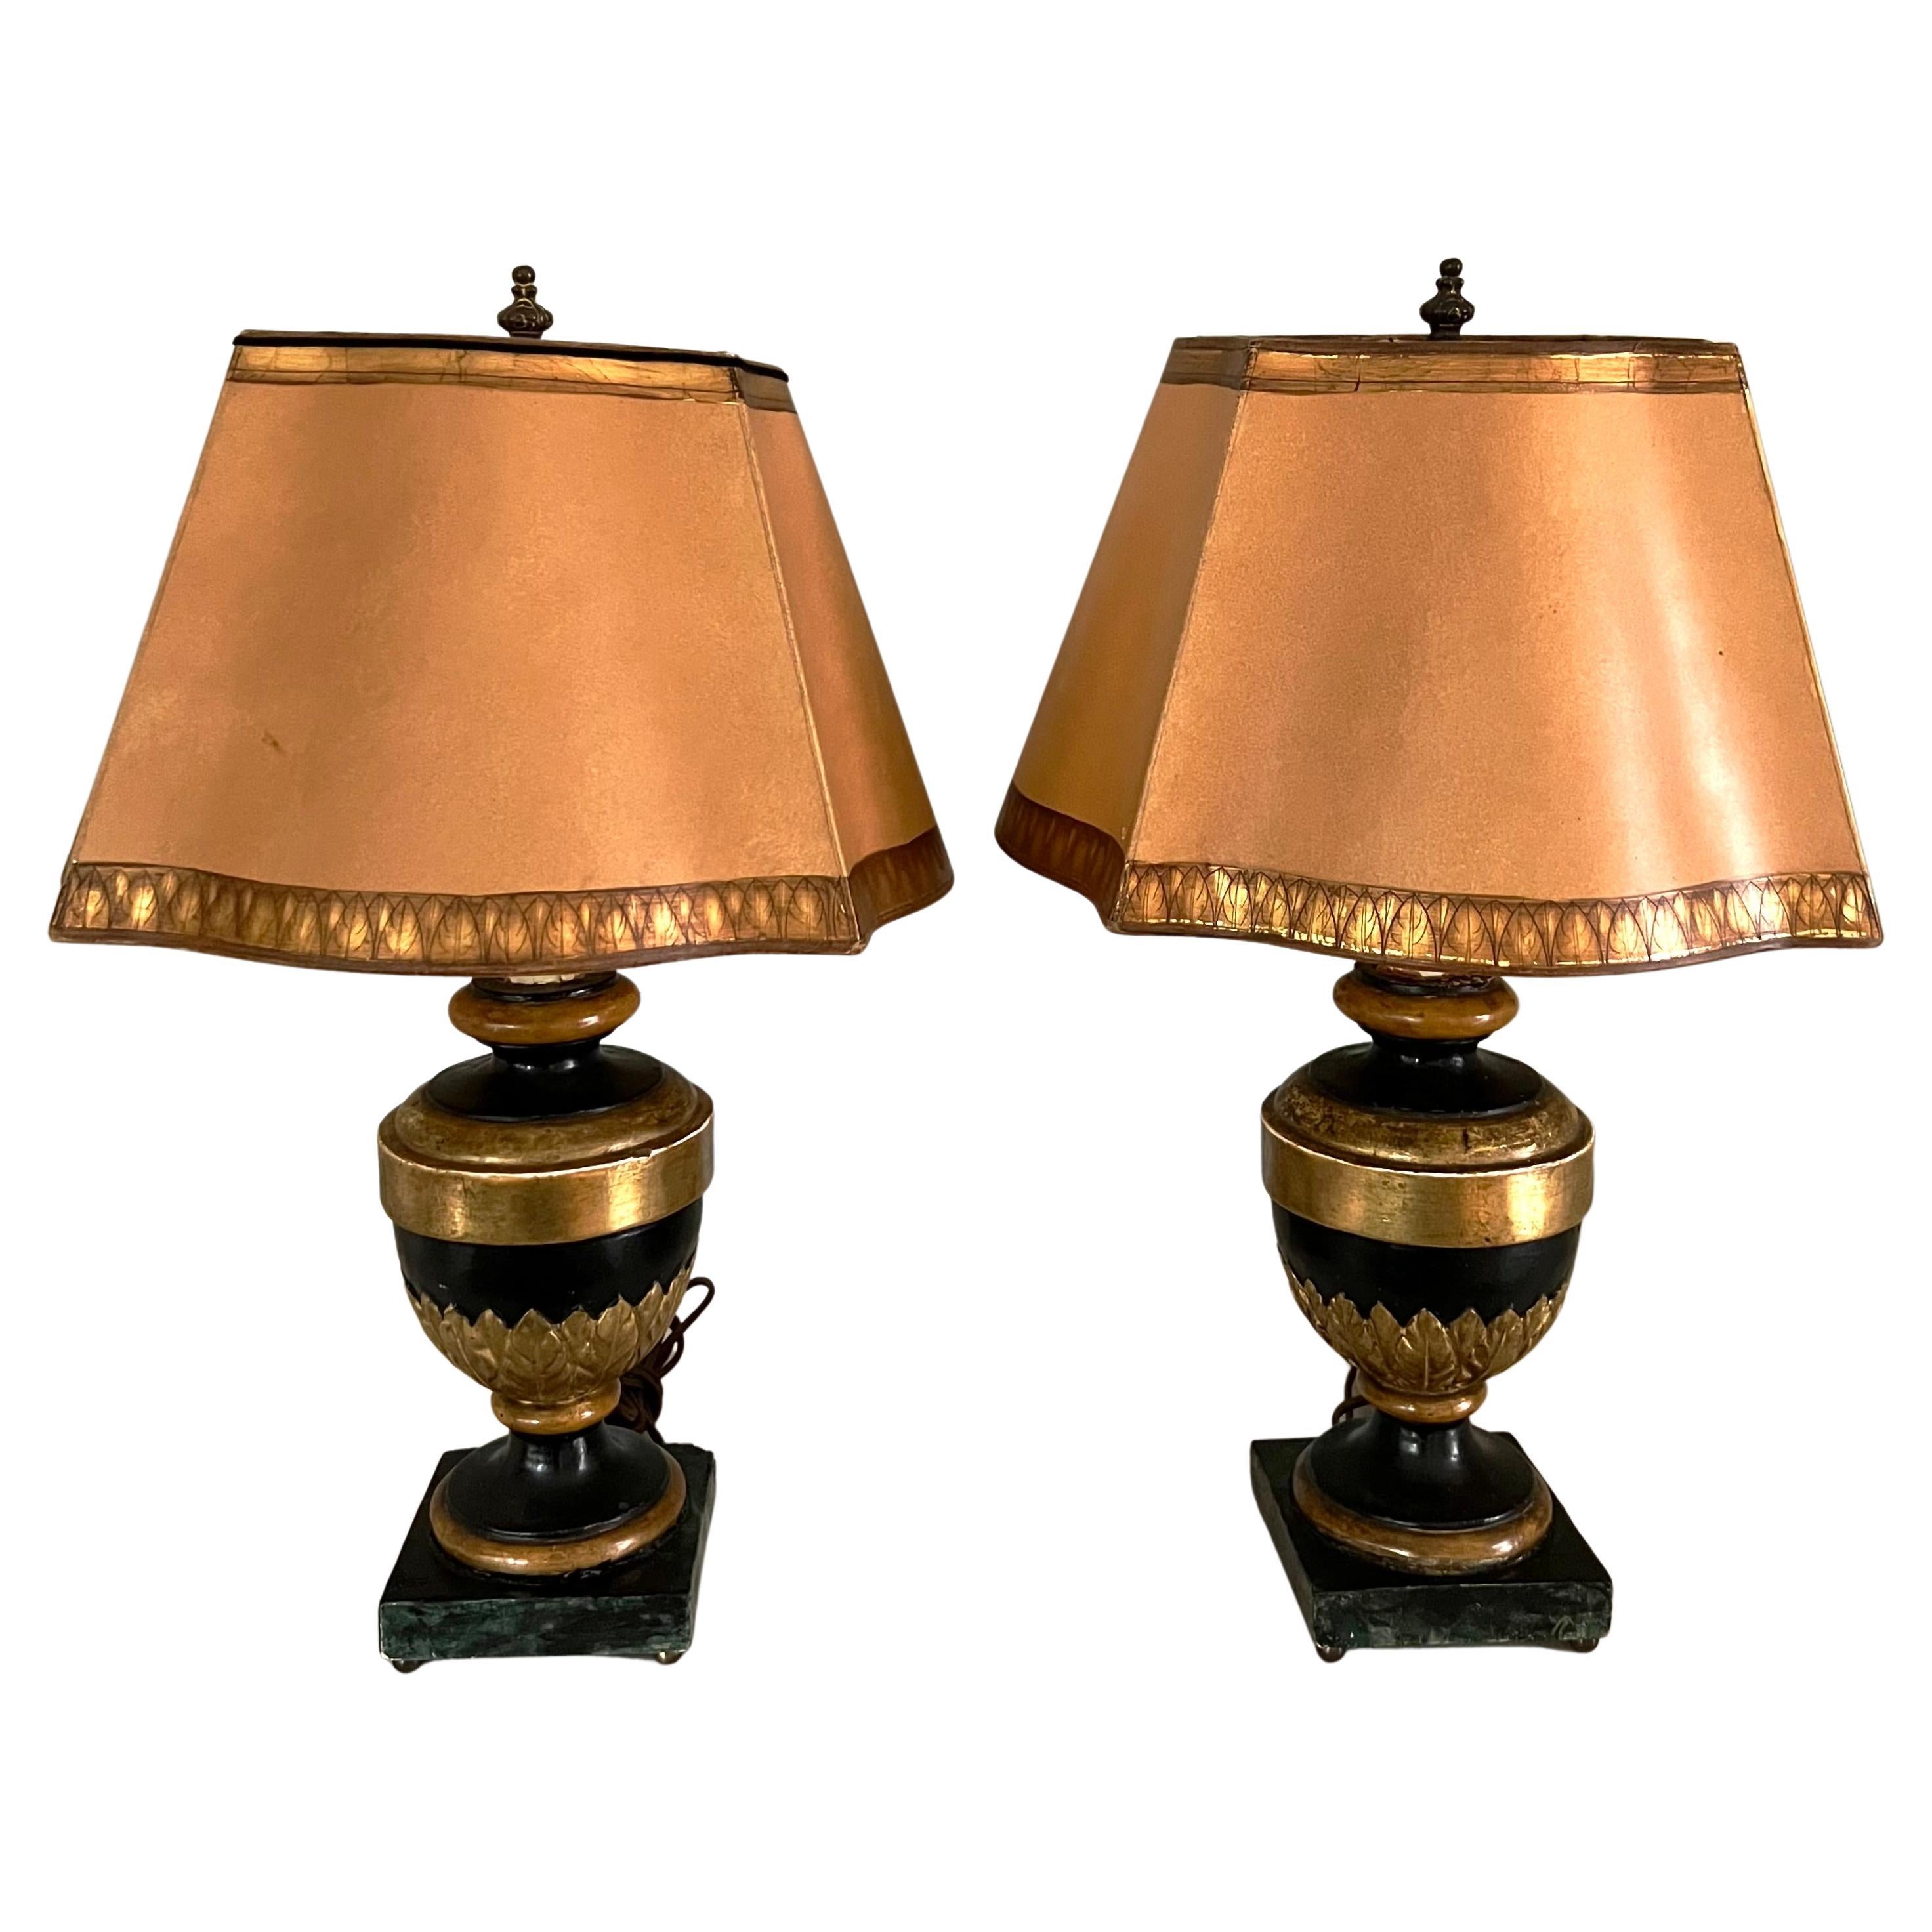 Pair of Carved Wood Gilt and Faux Marble Base Lamps with Matching Gilt Shades For Sale